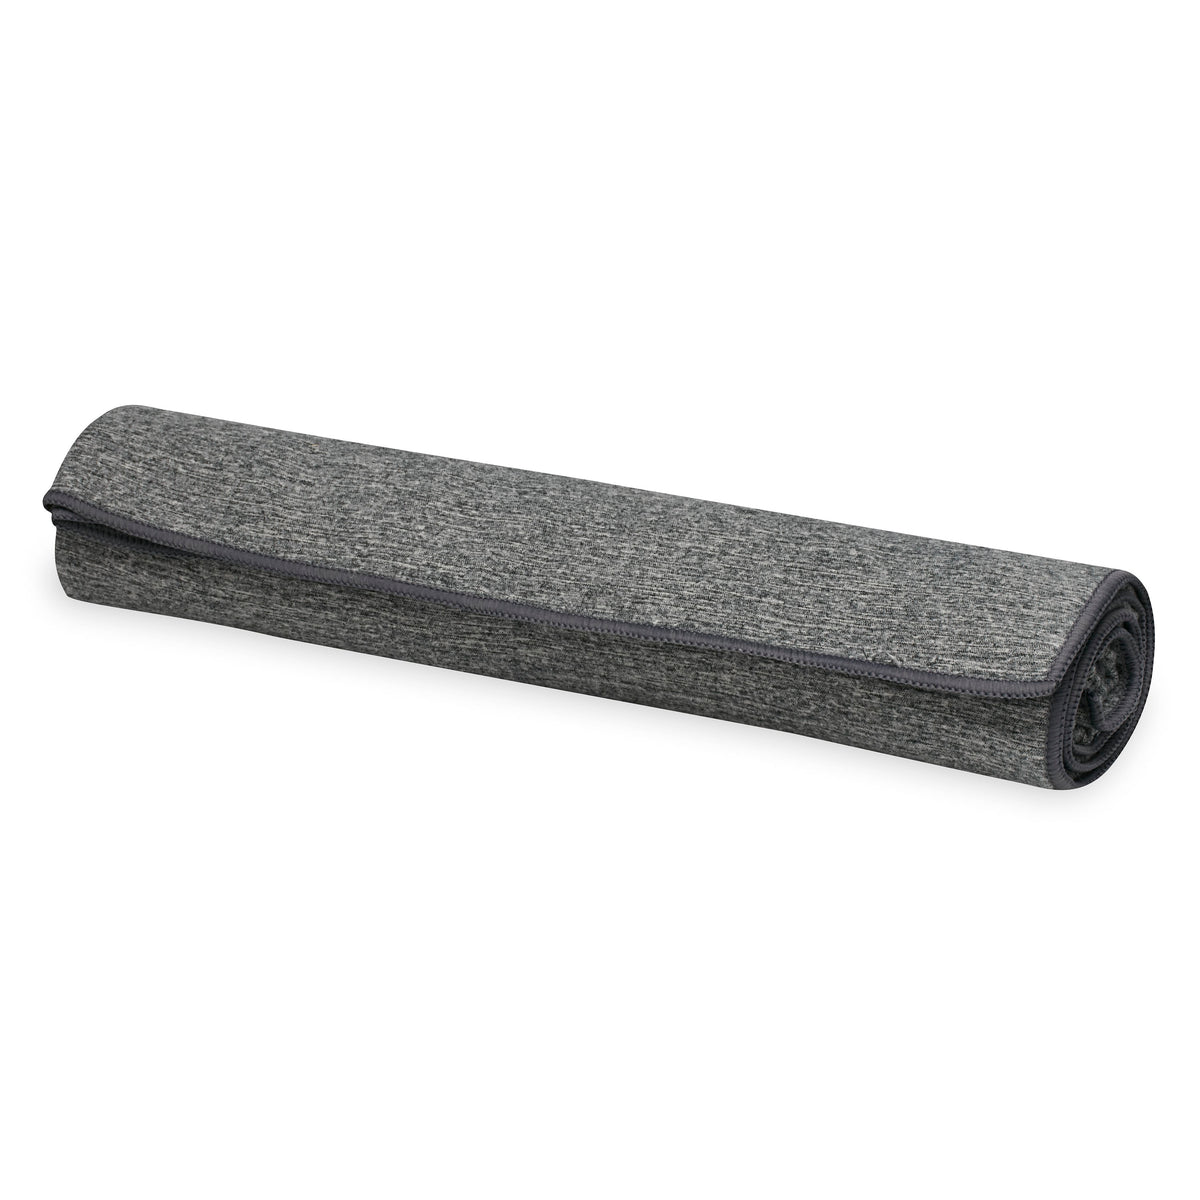 Gaiam Active Dry Yoga Mat Towel Black rolled up